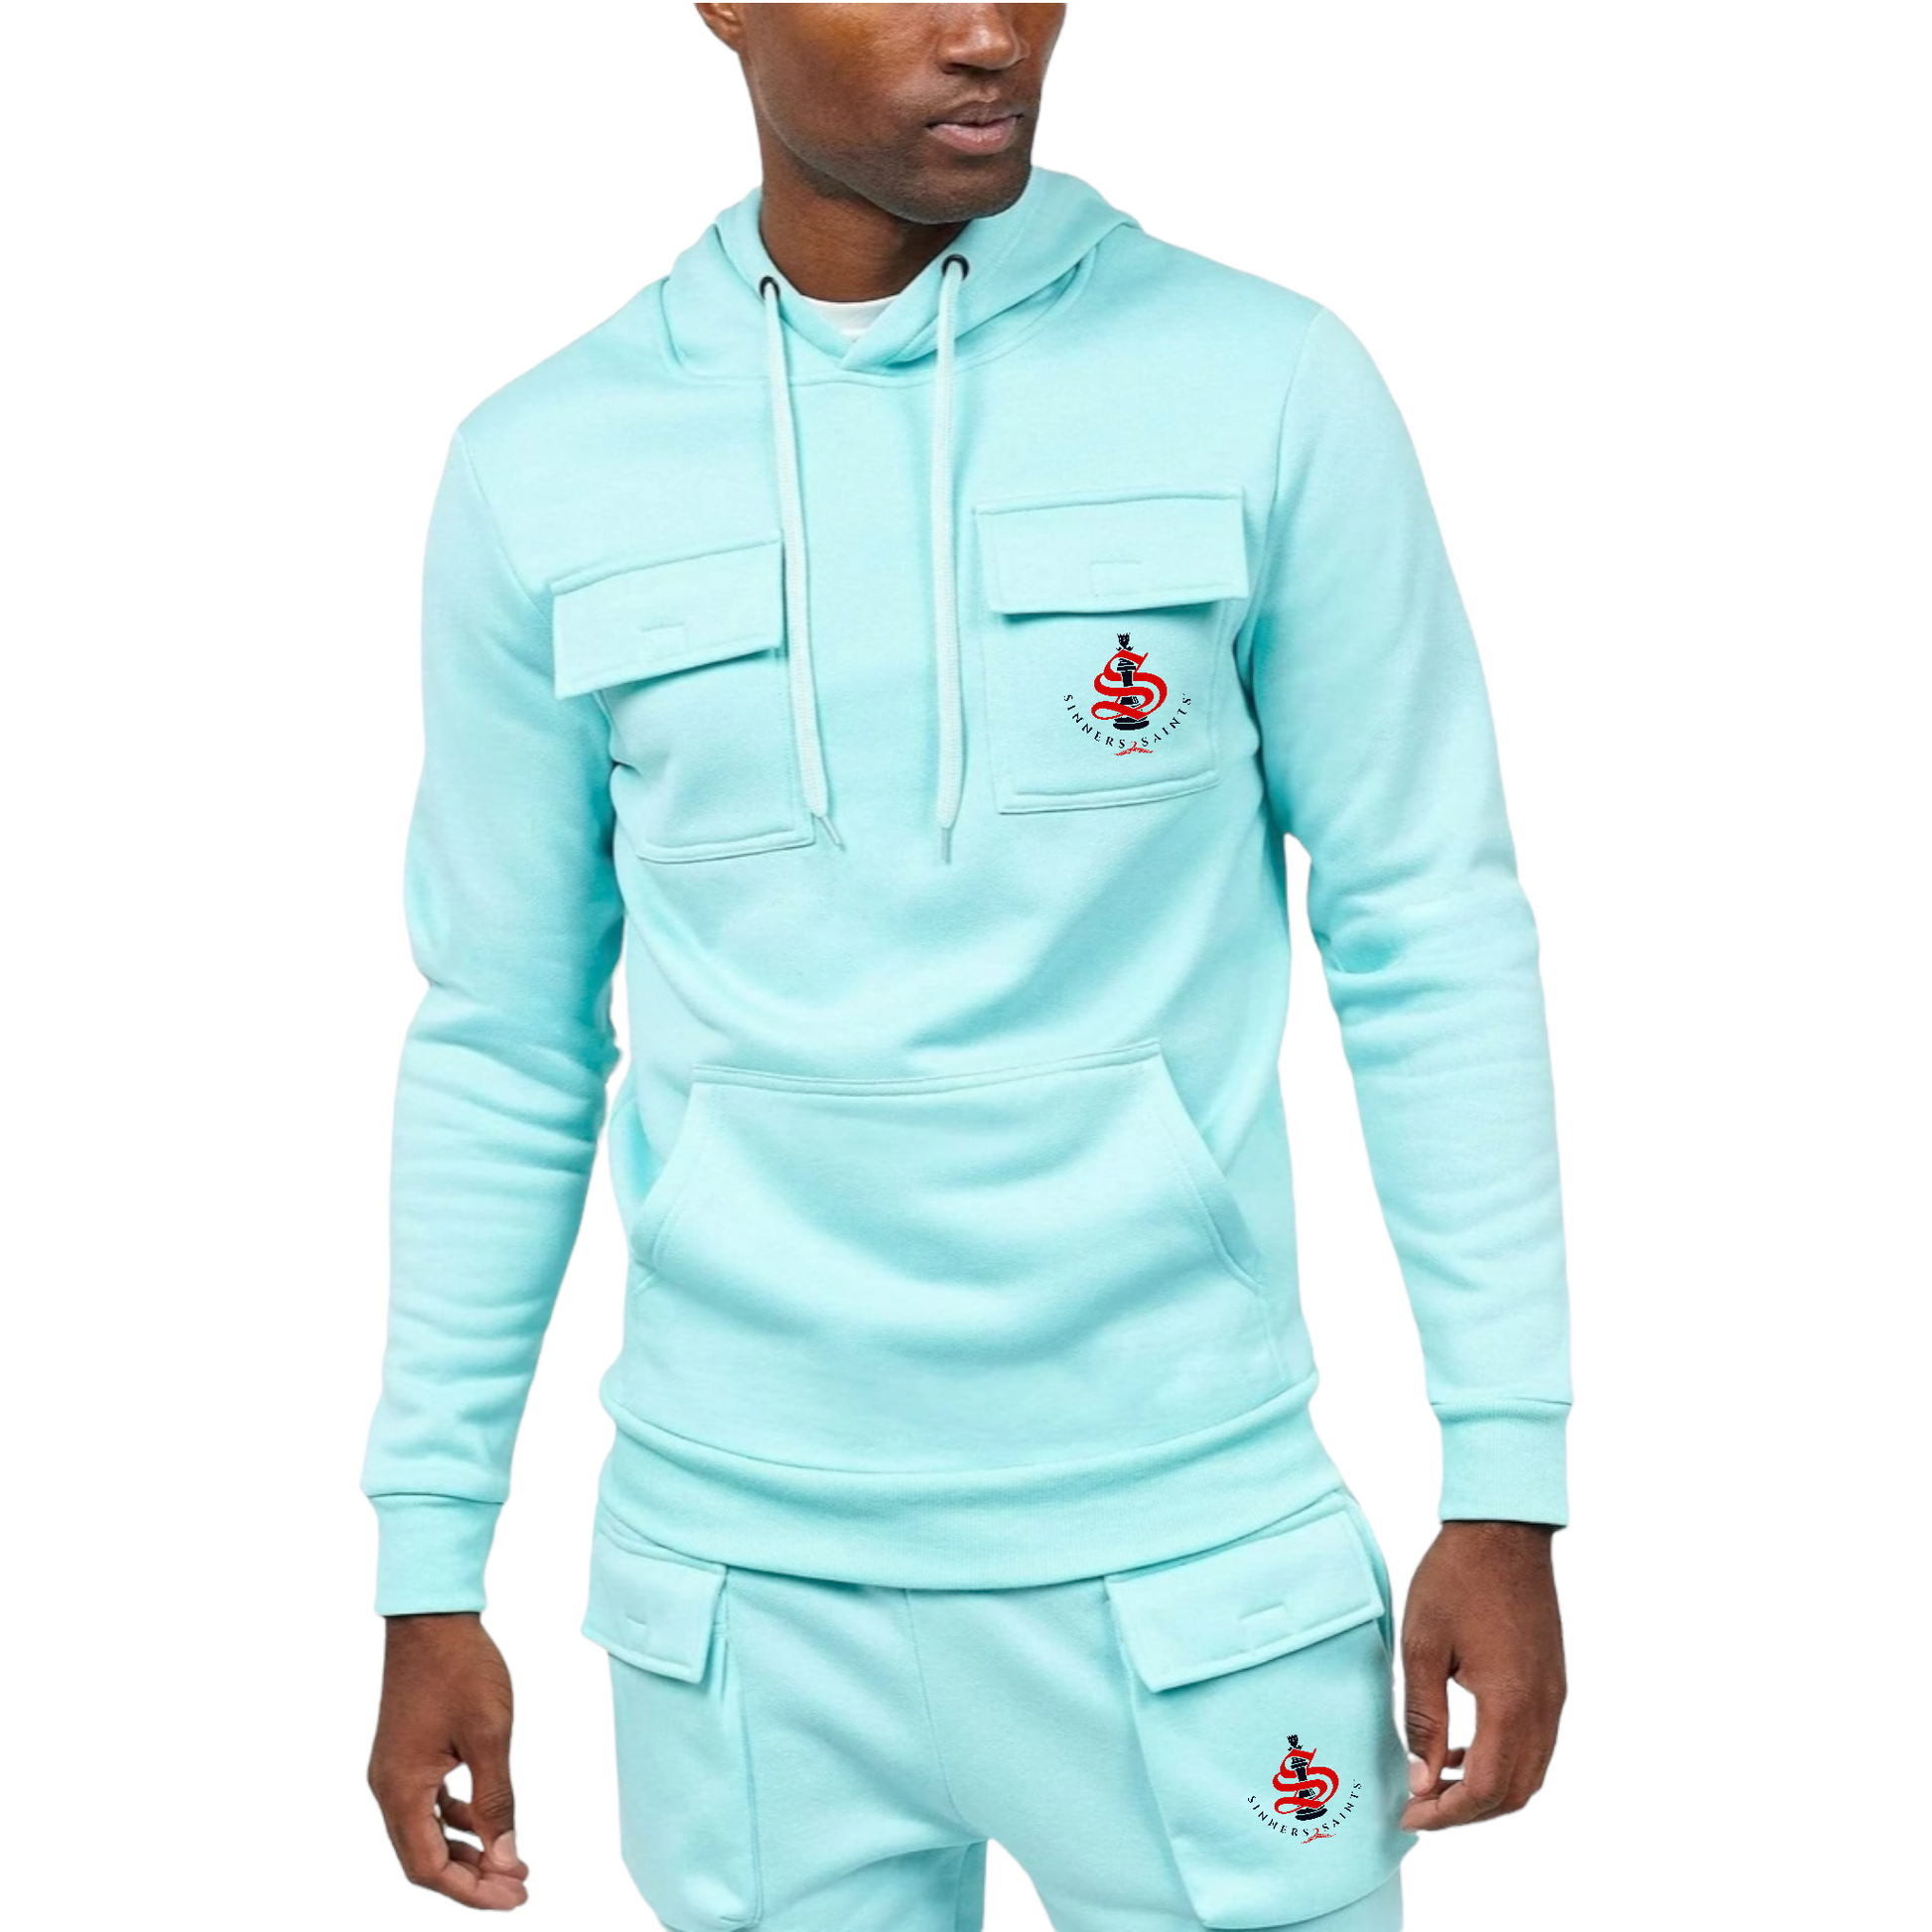 Shaxter Multi Pocket Cargo Hoodies and Sweatpants - Matching sets **Limited Release - TheSinners2Saints